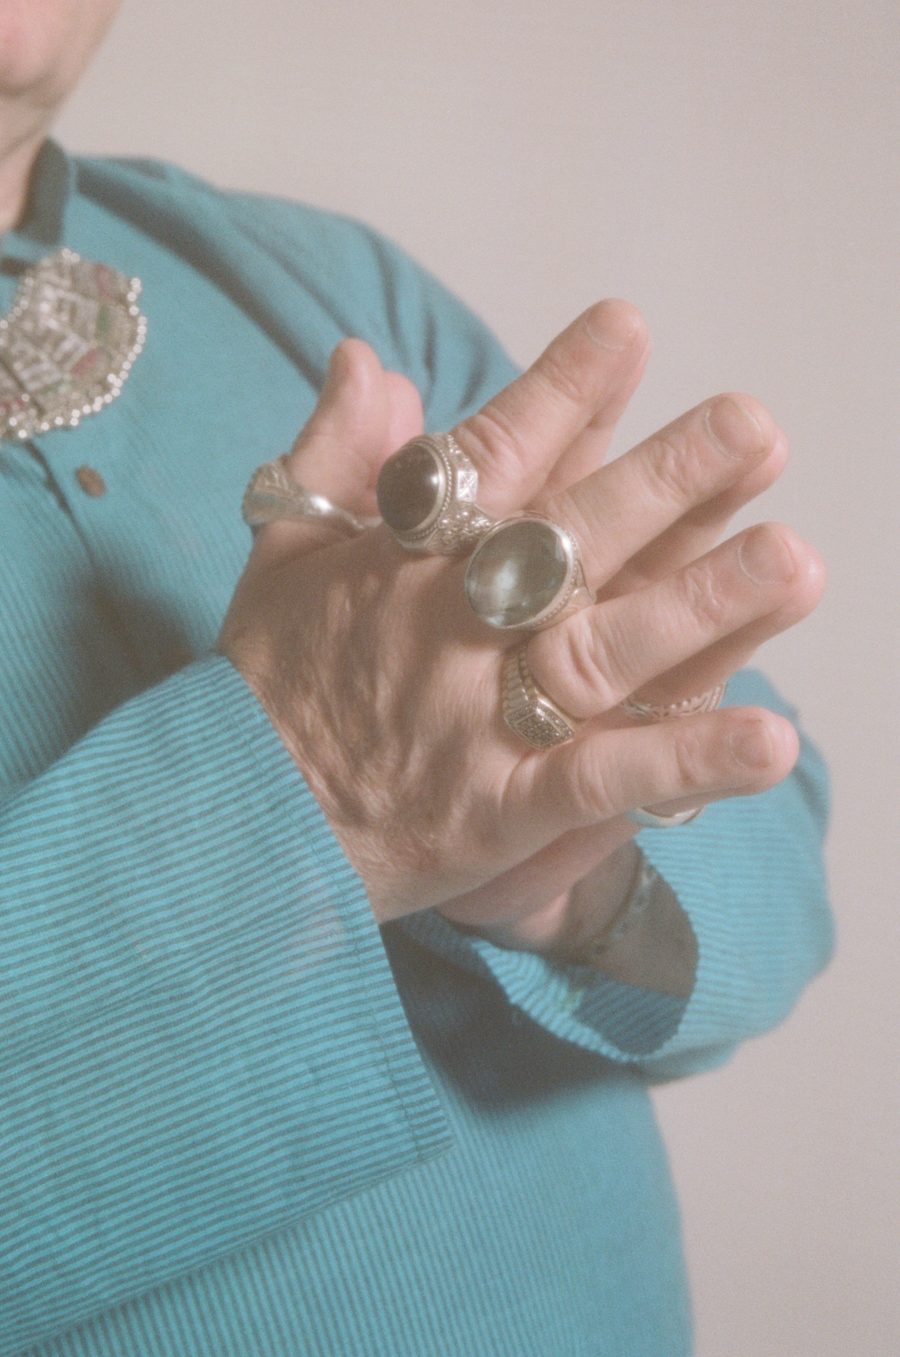 A close-up photo of Eden's hands with chunky jewellery. From Foreground: Portraits of Older Transgender and Gender Diverse People